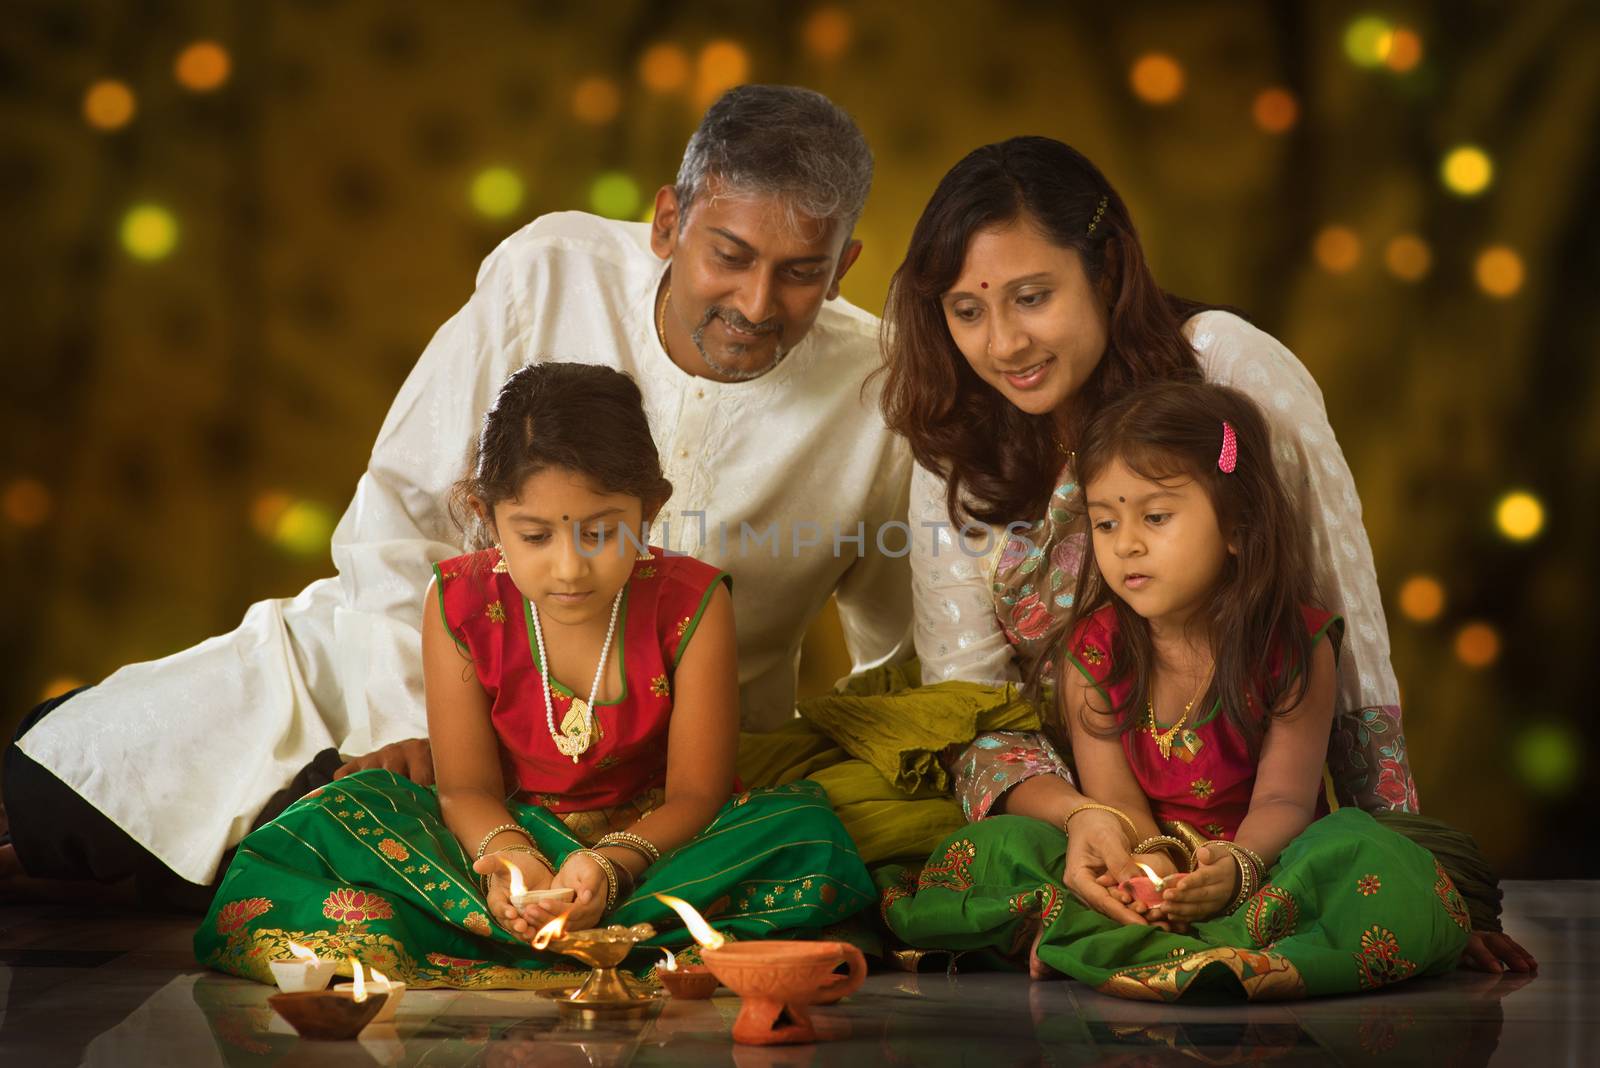 Indian family in traditional sari lighting oil lamp and celebrating Diwali, fesitval of lights inside a temple. Little girl hands holding oil lamp indoors.